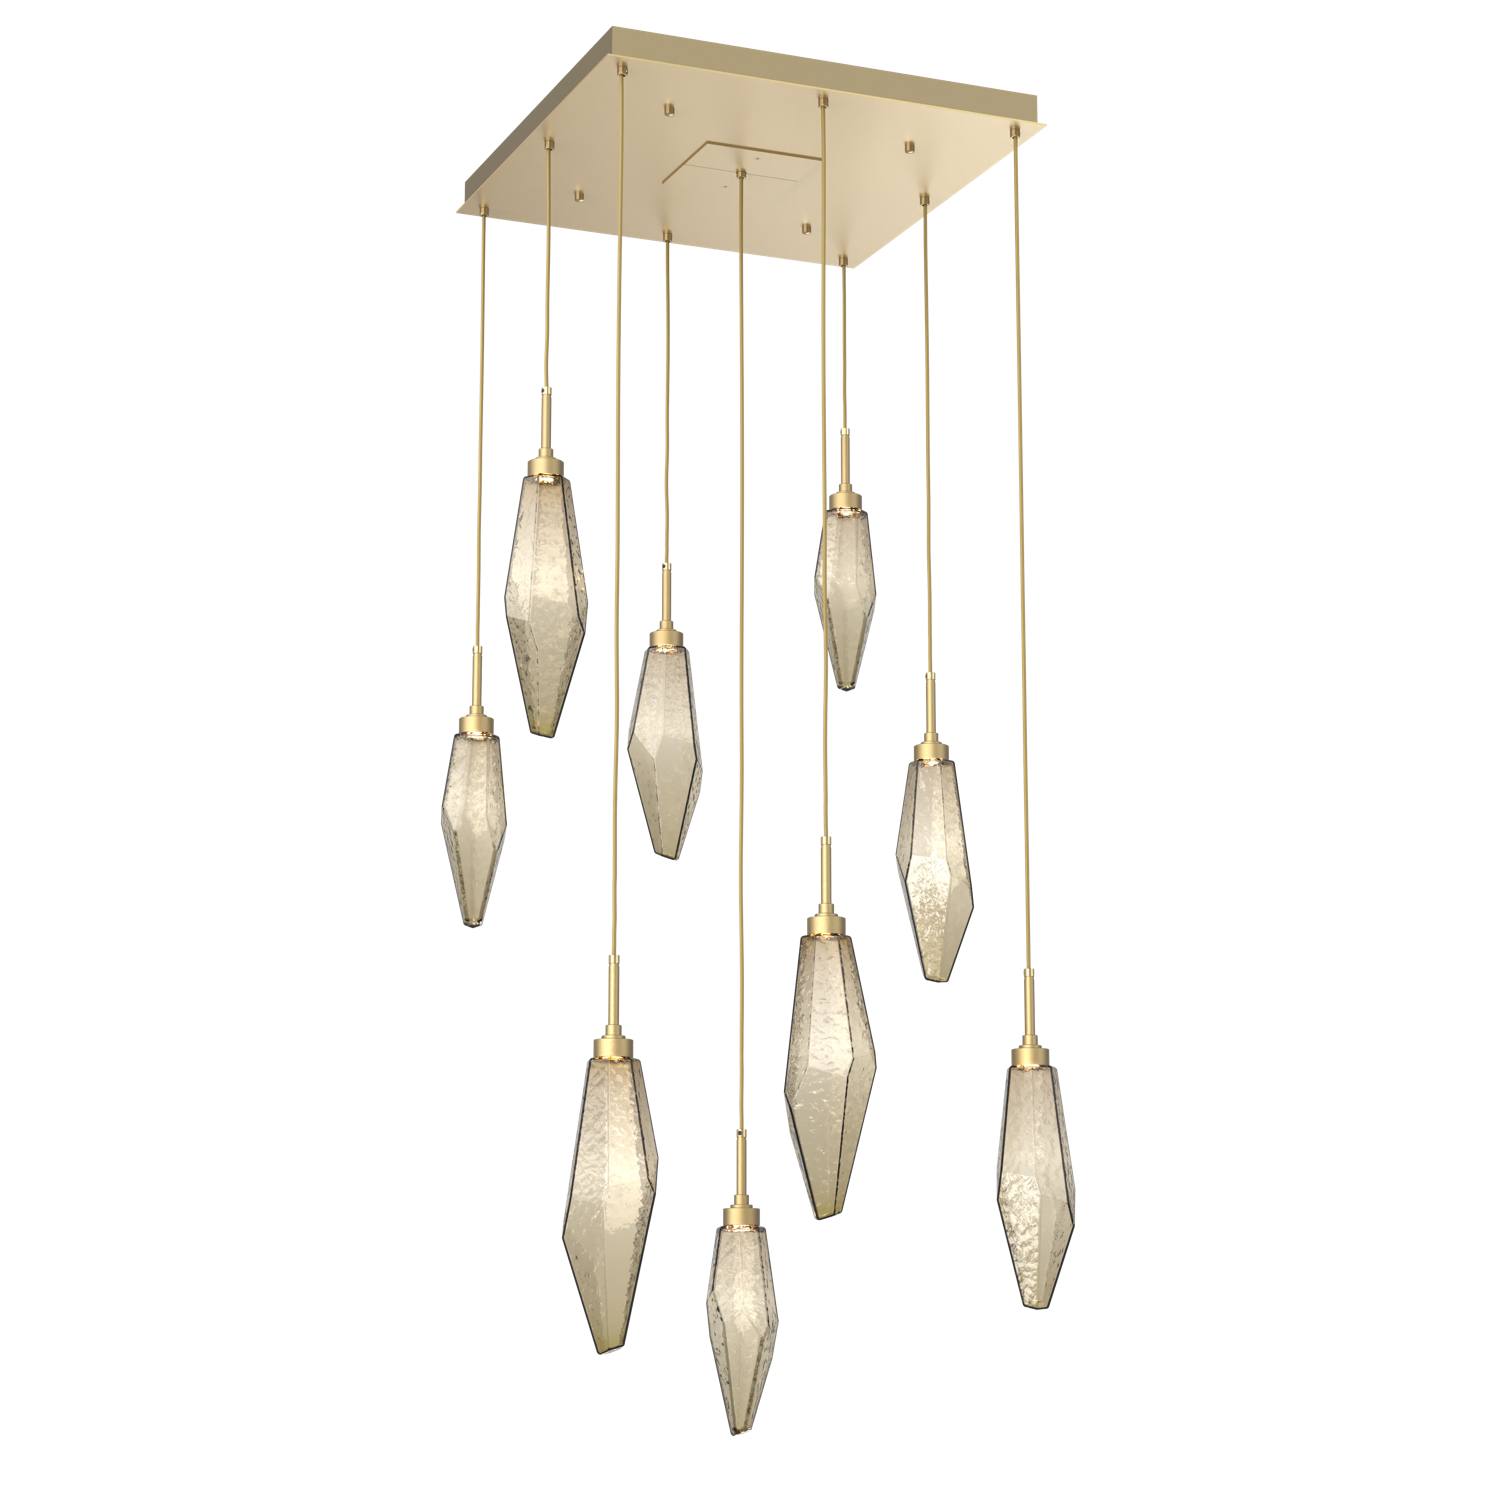 CHB0050-09-GB-CB-Hammerton-Studio-Rock-Crystal-9-light-square-pendant-chandelier-with-gilded-brass-finish-and-chilled-bronze-blown-glass-shades-and-LED-lamping